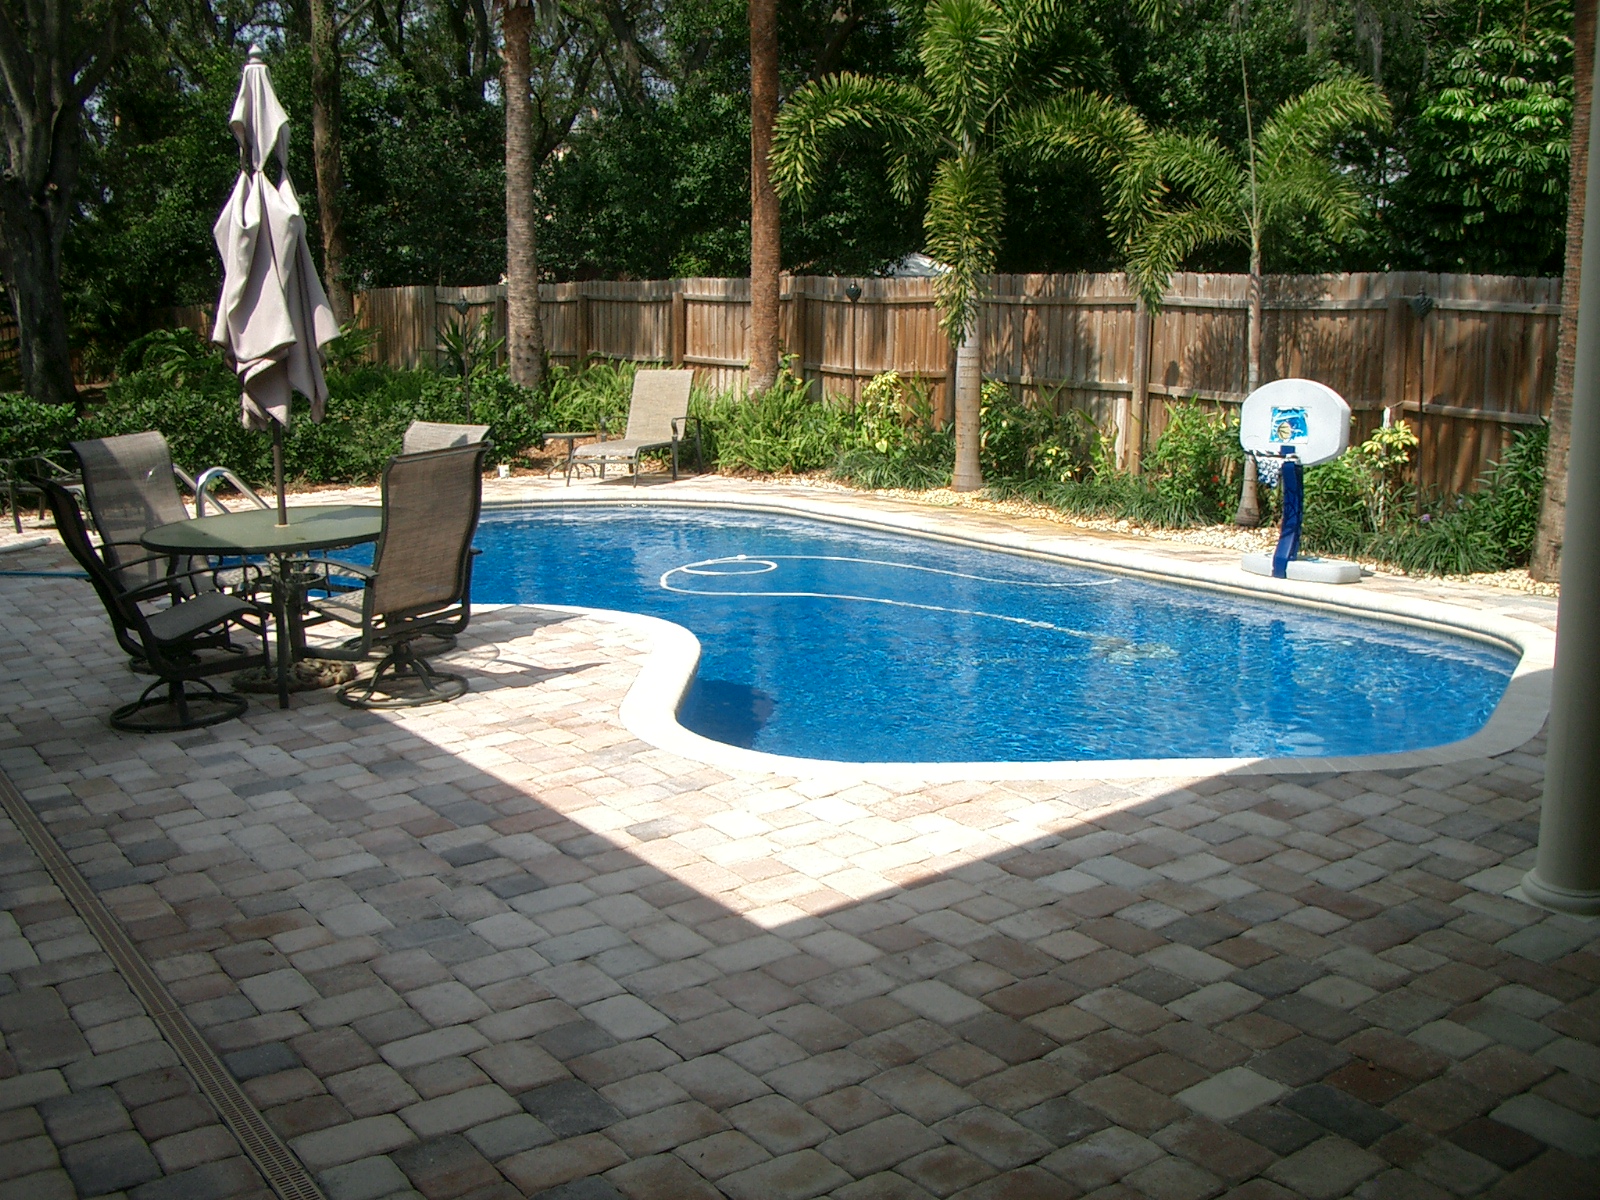 backyard pool ideas pictures photo - 1